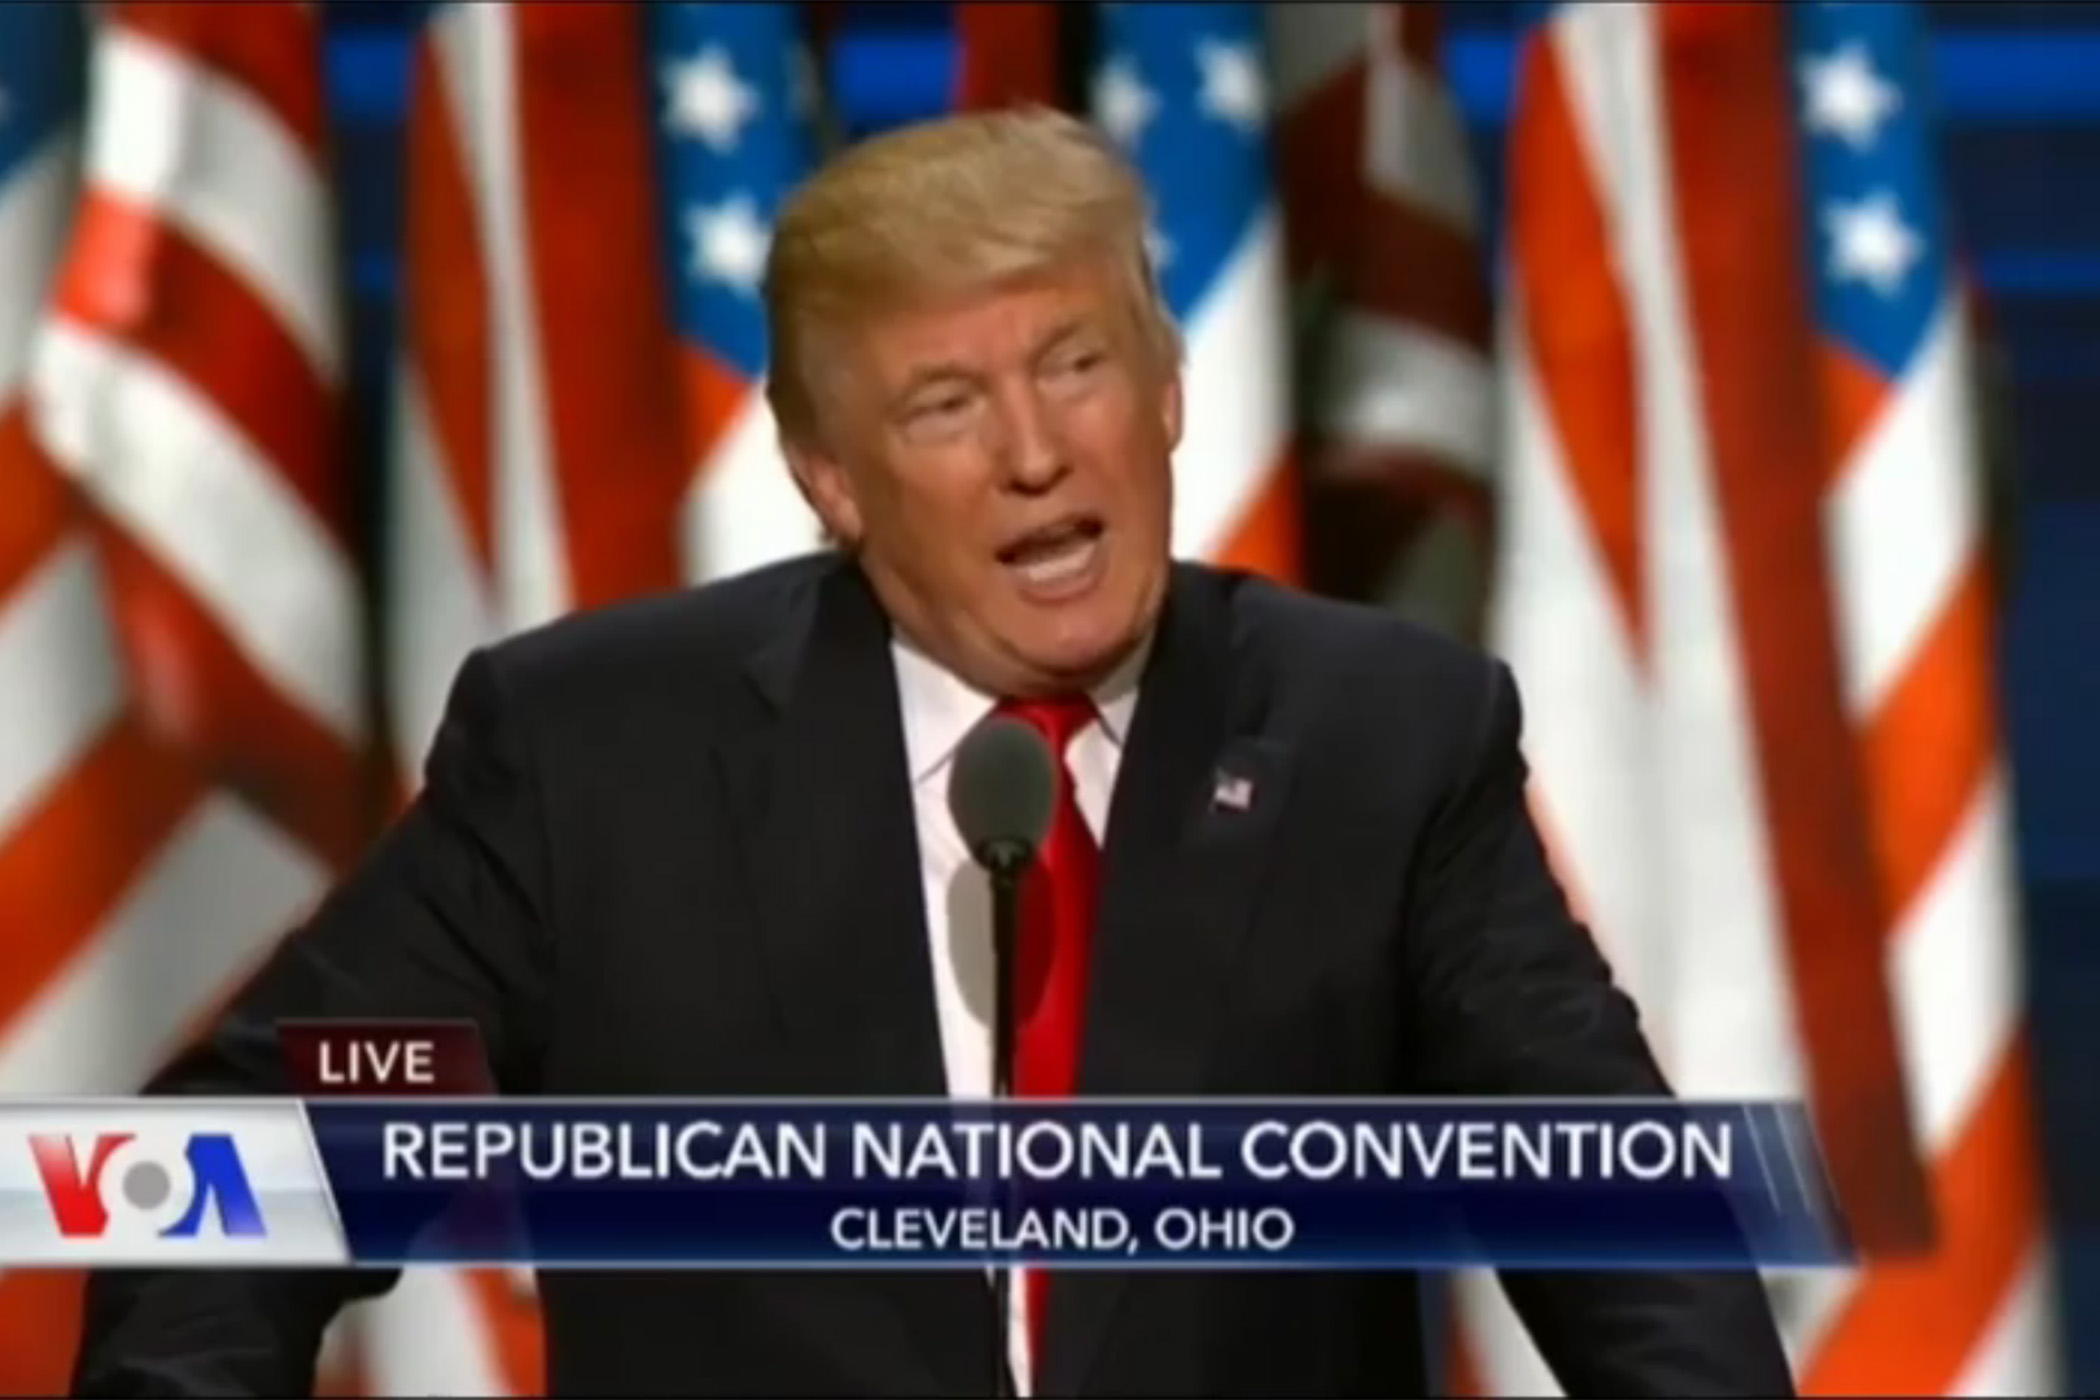 Donald Trump speaking in front of several American flags in the background